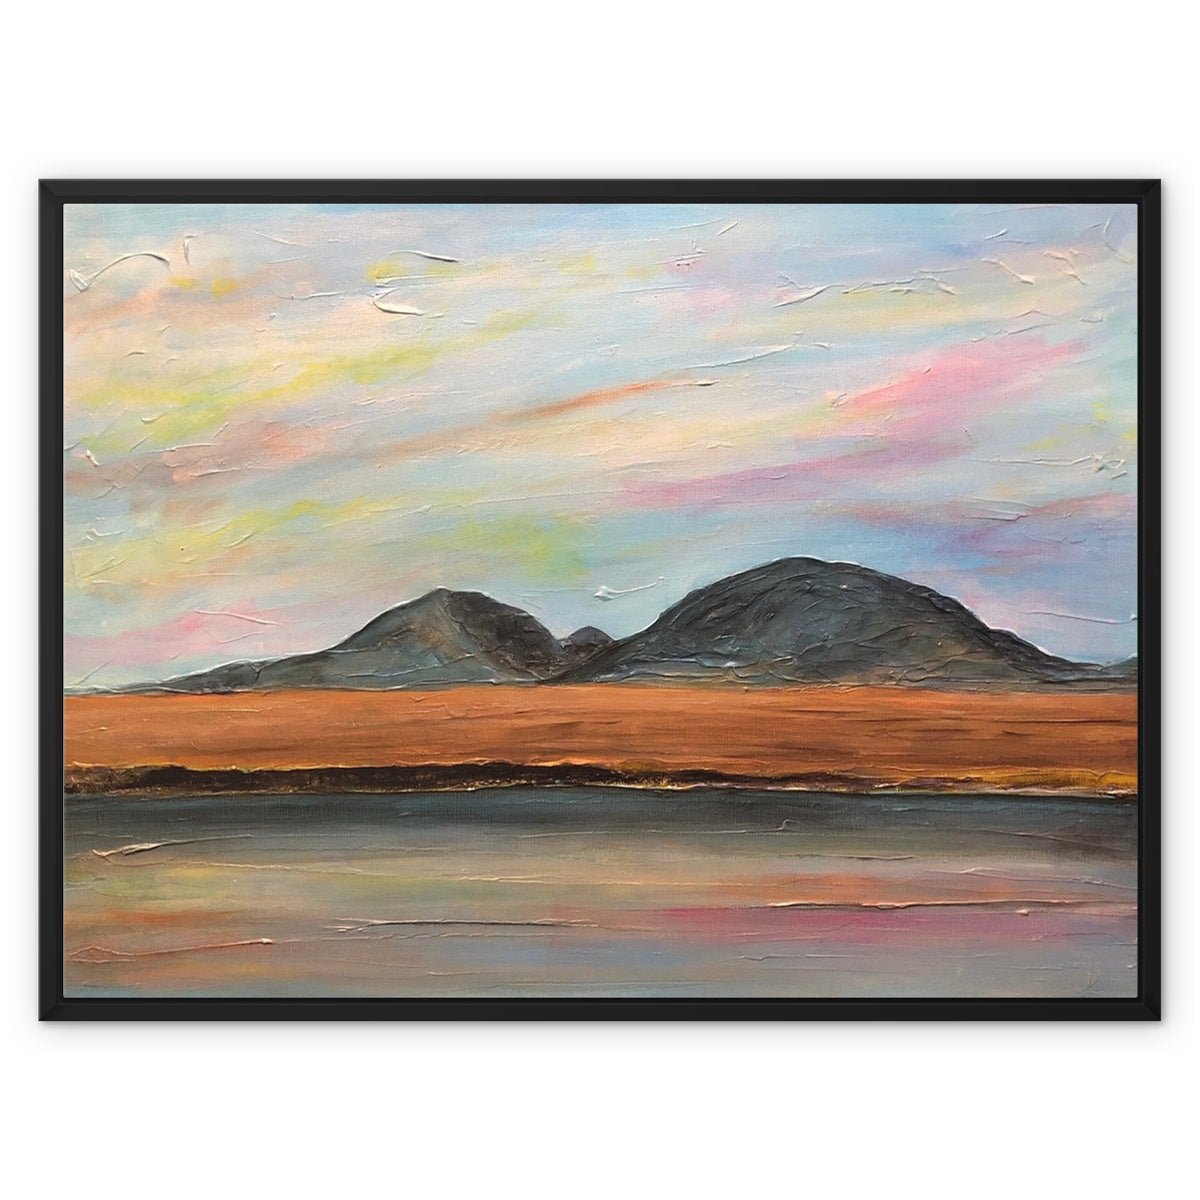 Jura Dawn Painting | Framed Canvas From Scotland-Floating Framed Canvas Prints-Hebridean Islands Art Gallery-32"x24"-Black Frame-Paintings, Prints, Homeware, Art Gifts From Scotland By Scottish Artist Kevin Hunter